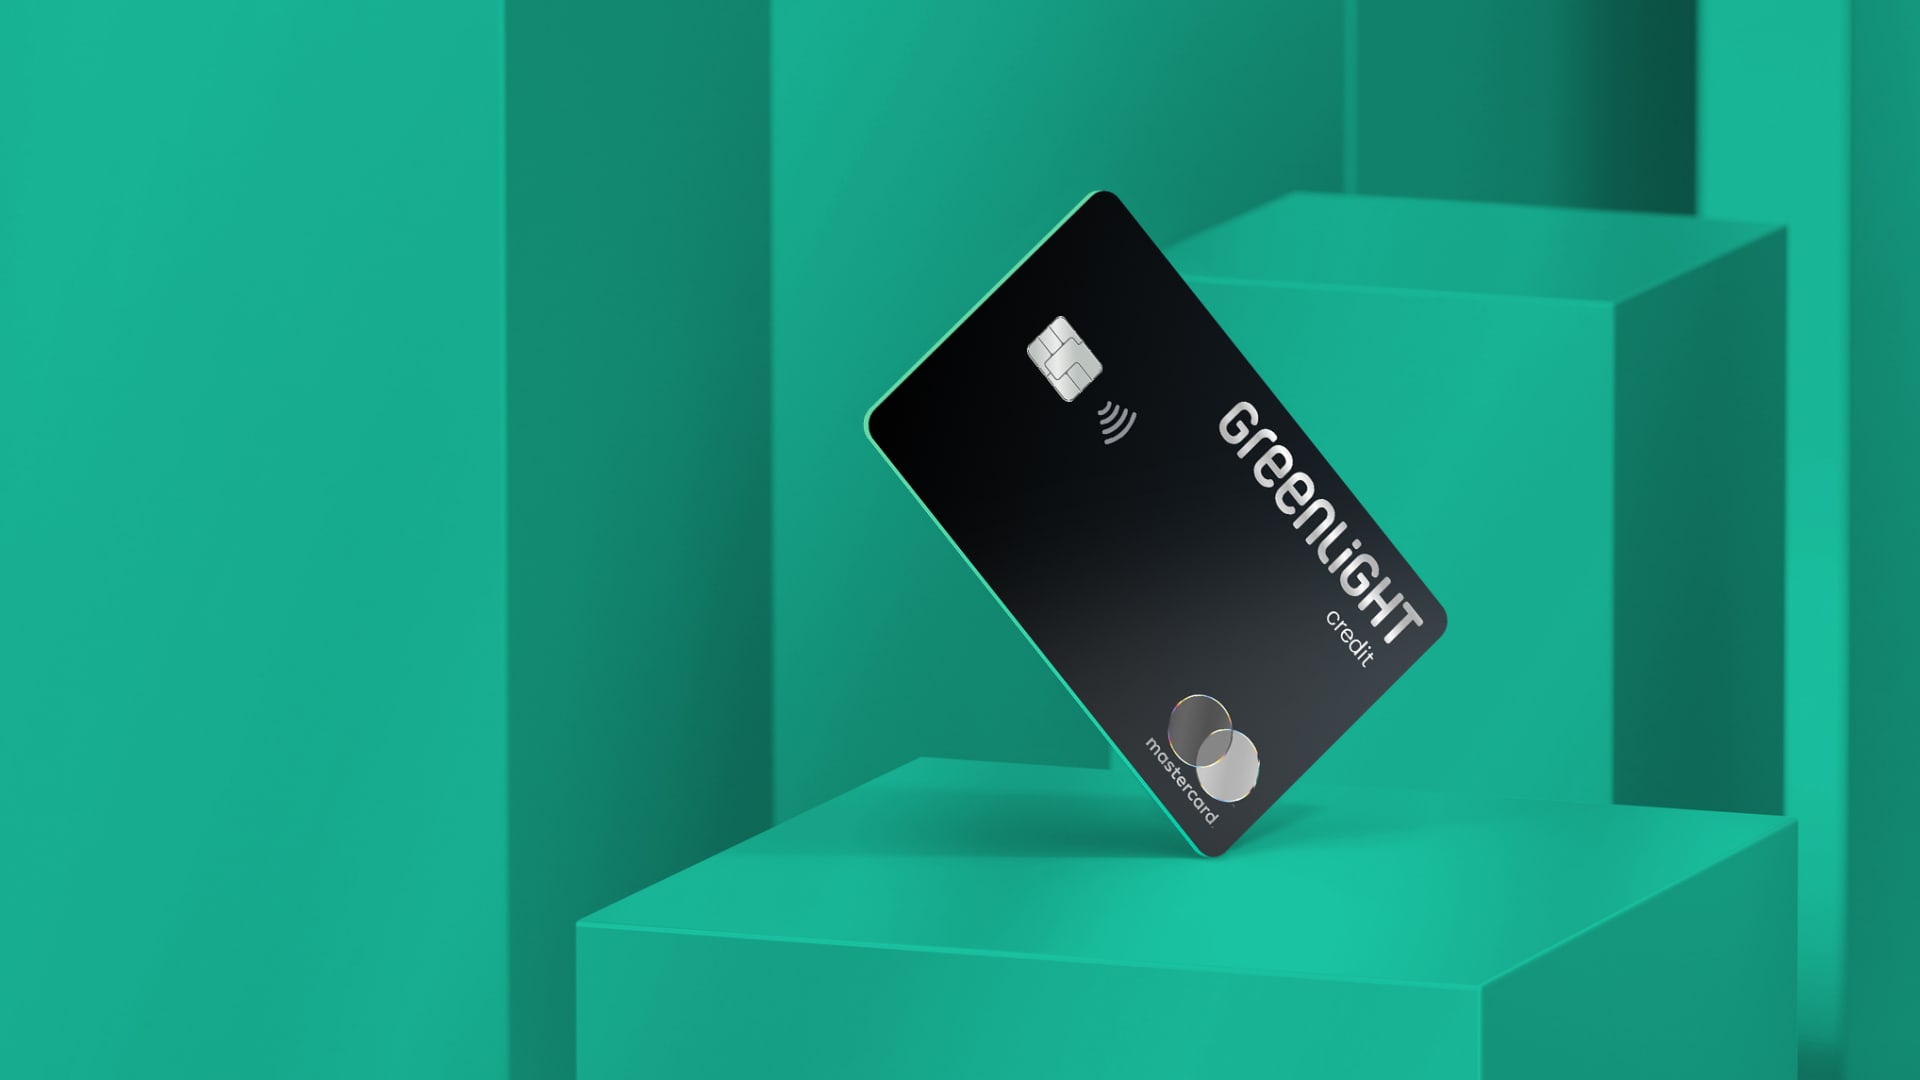 greenlights-smart-debit-card-for-kids-available-on-apple-pay